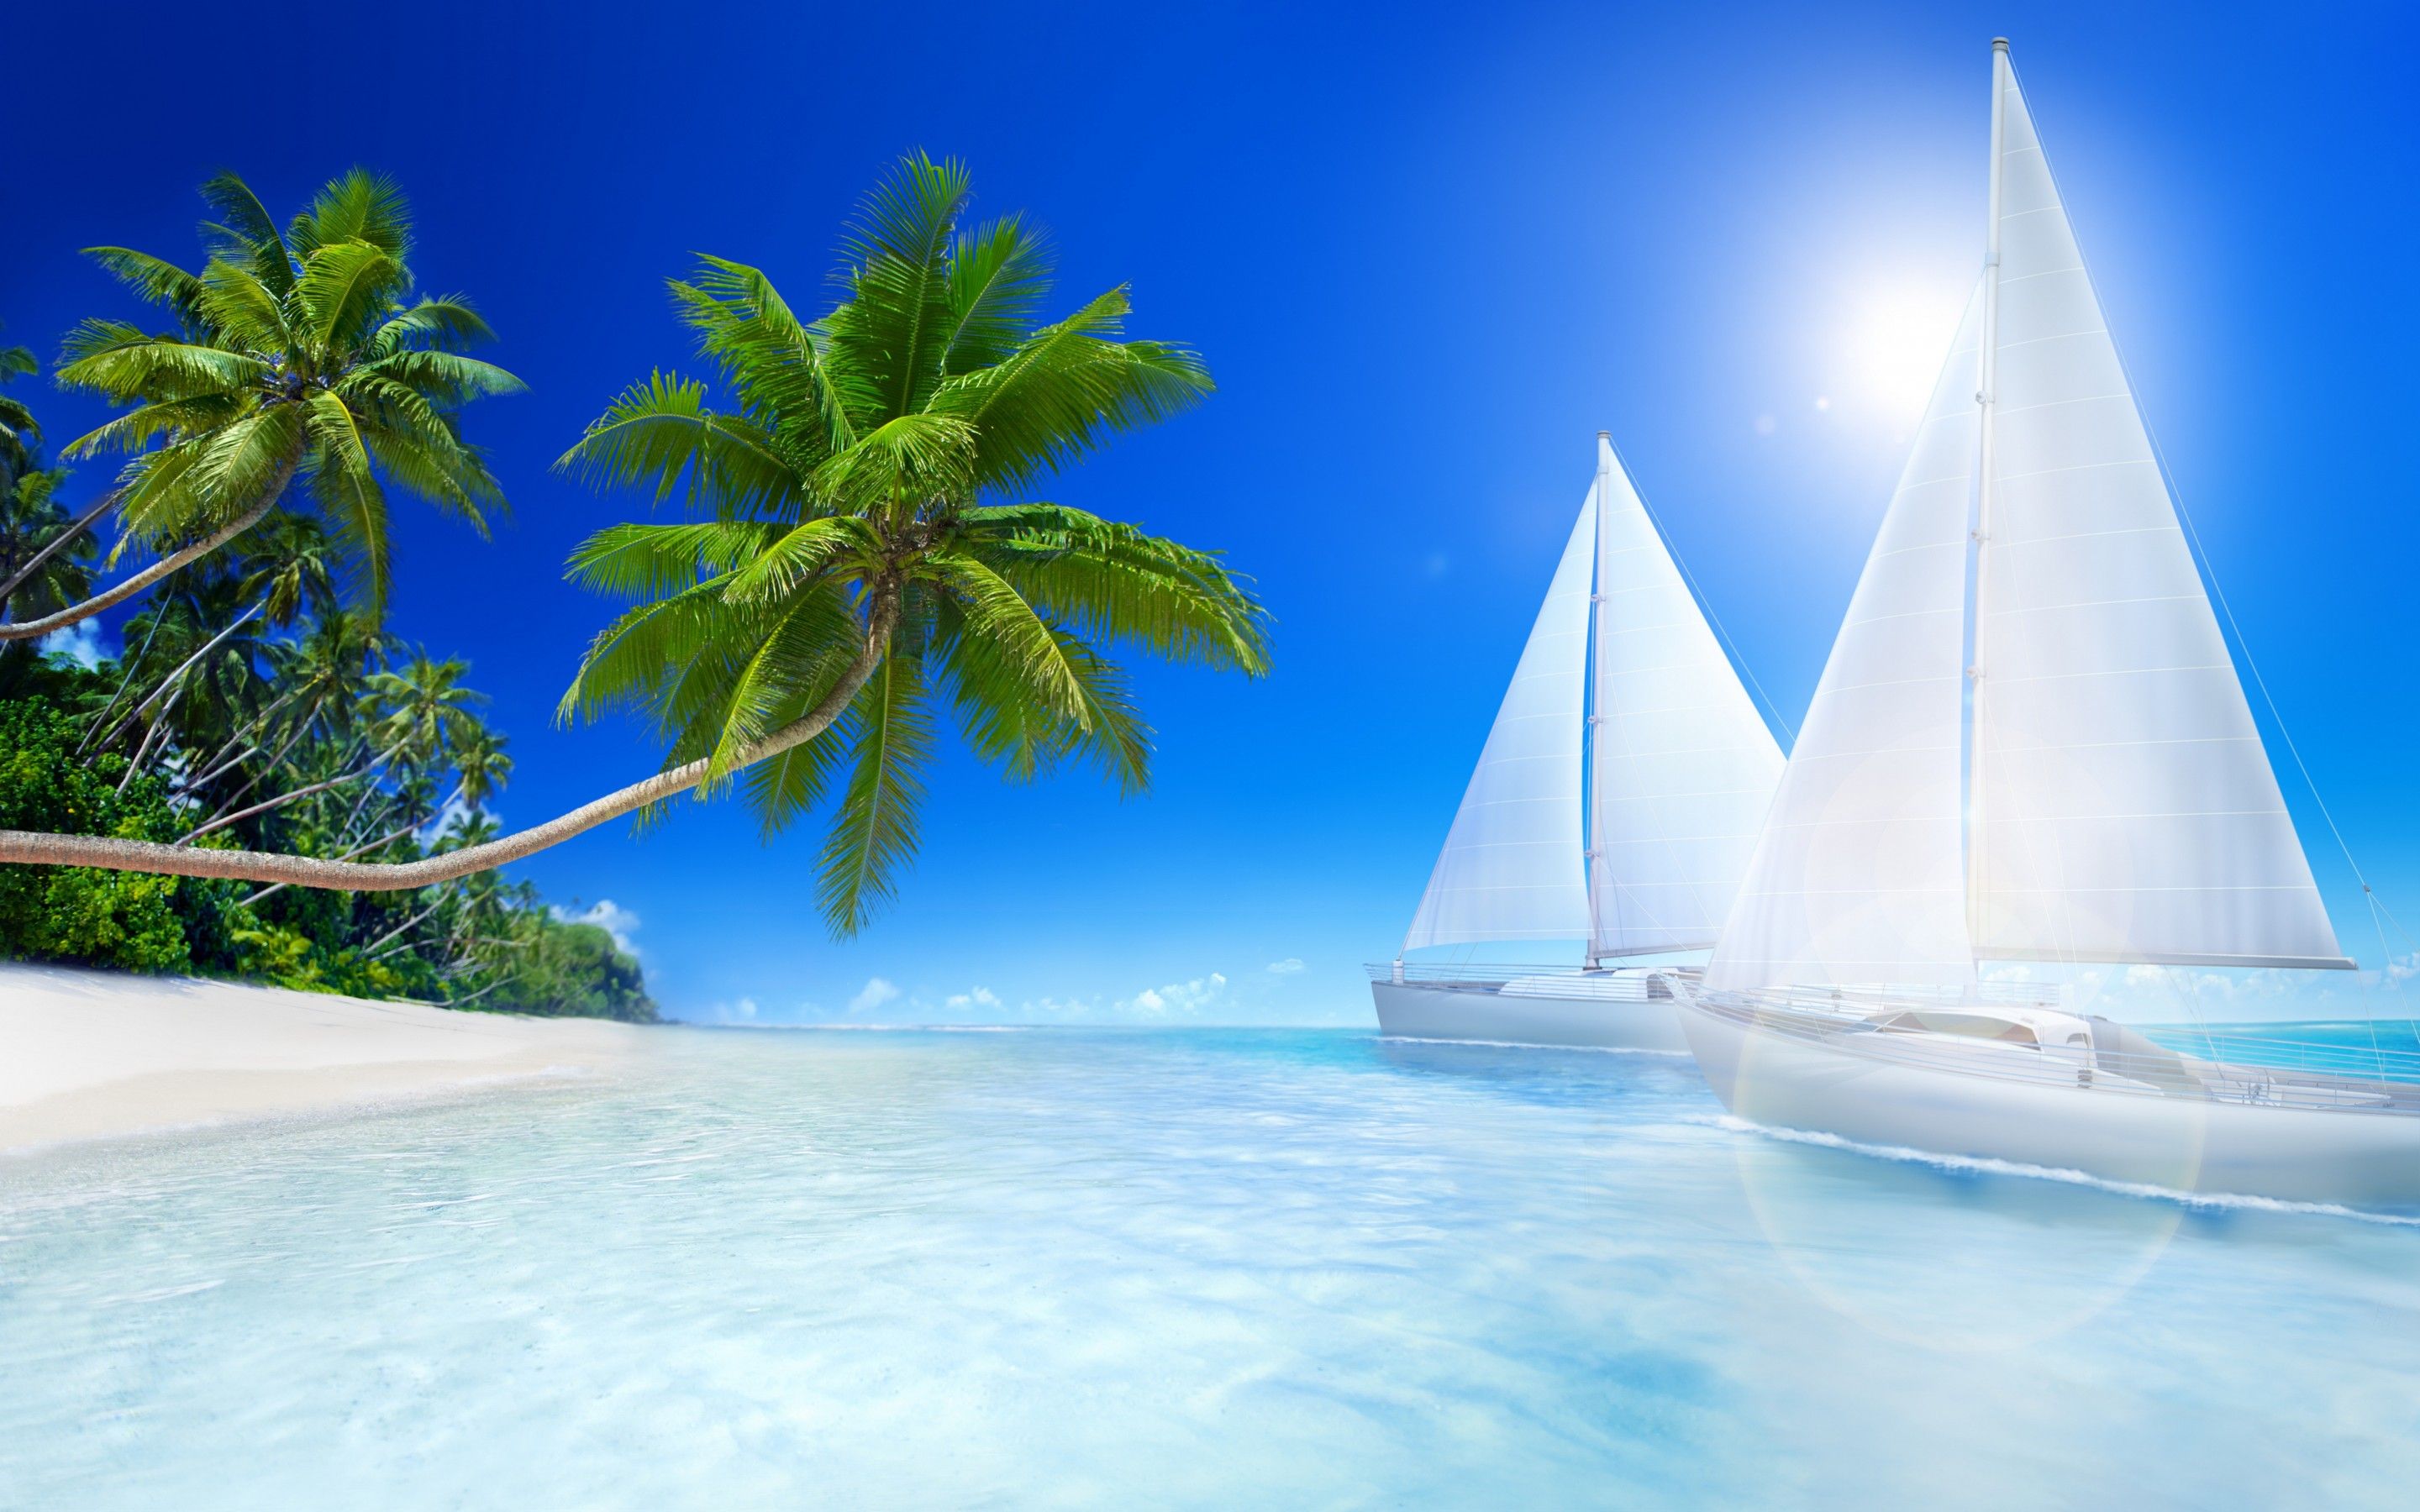 Tropical Beach Wallpapers | Free HD Wallpapers for Desktop, iPad ...